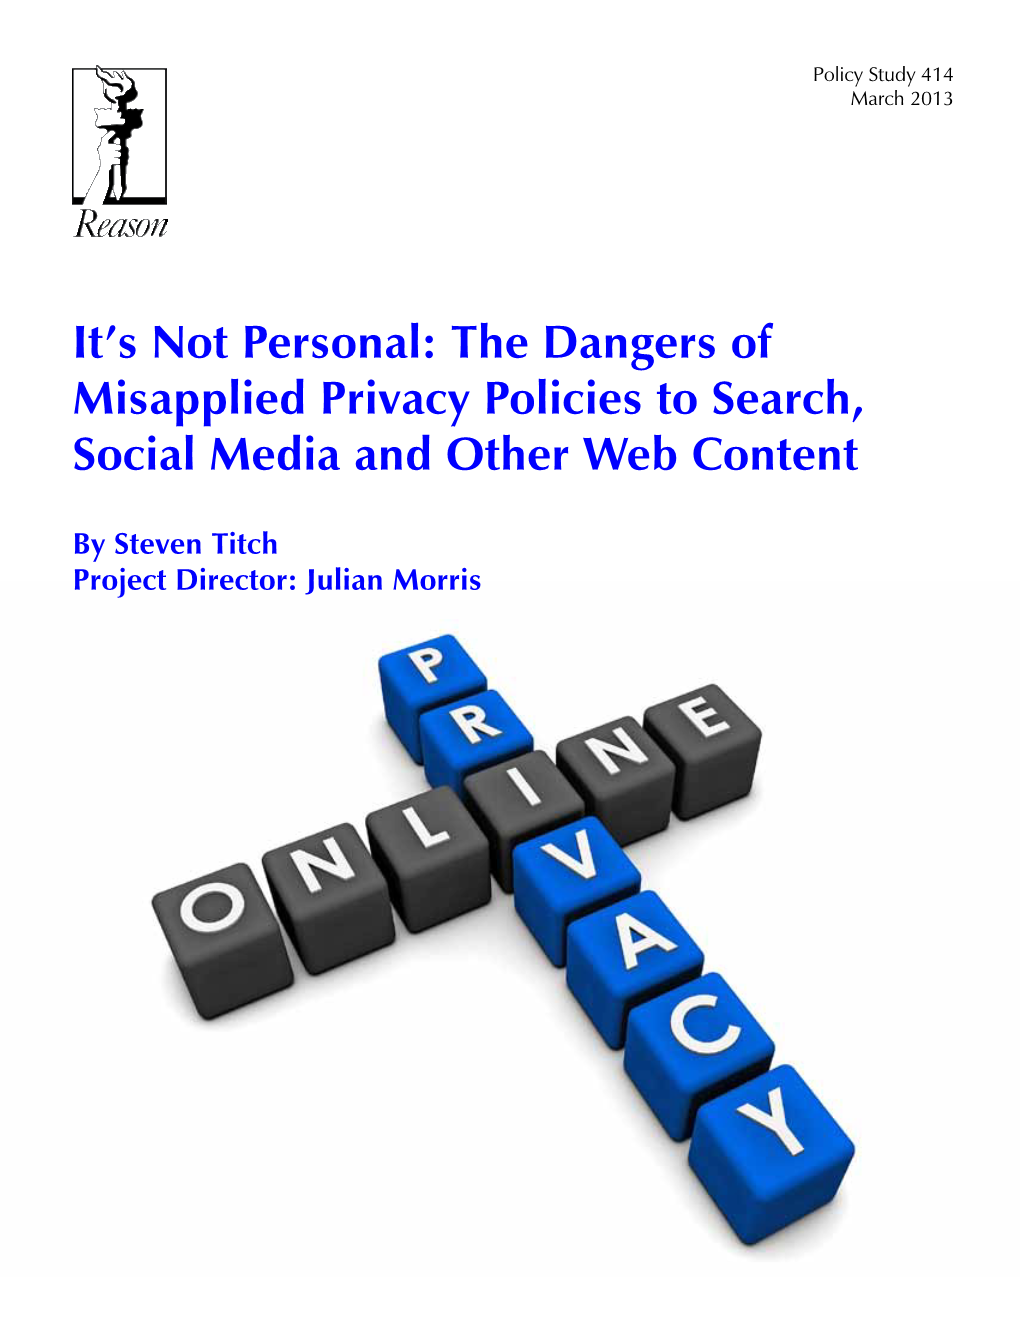 It's Not Personal: the Dangers of Misapplied Privacy Policies To